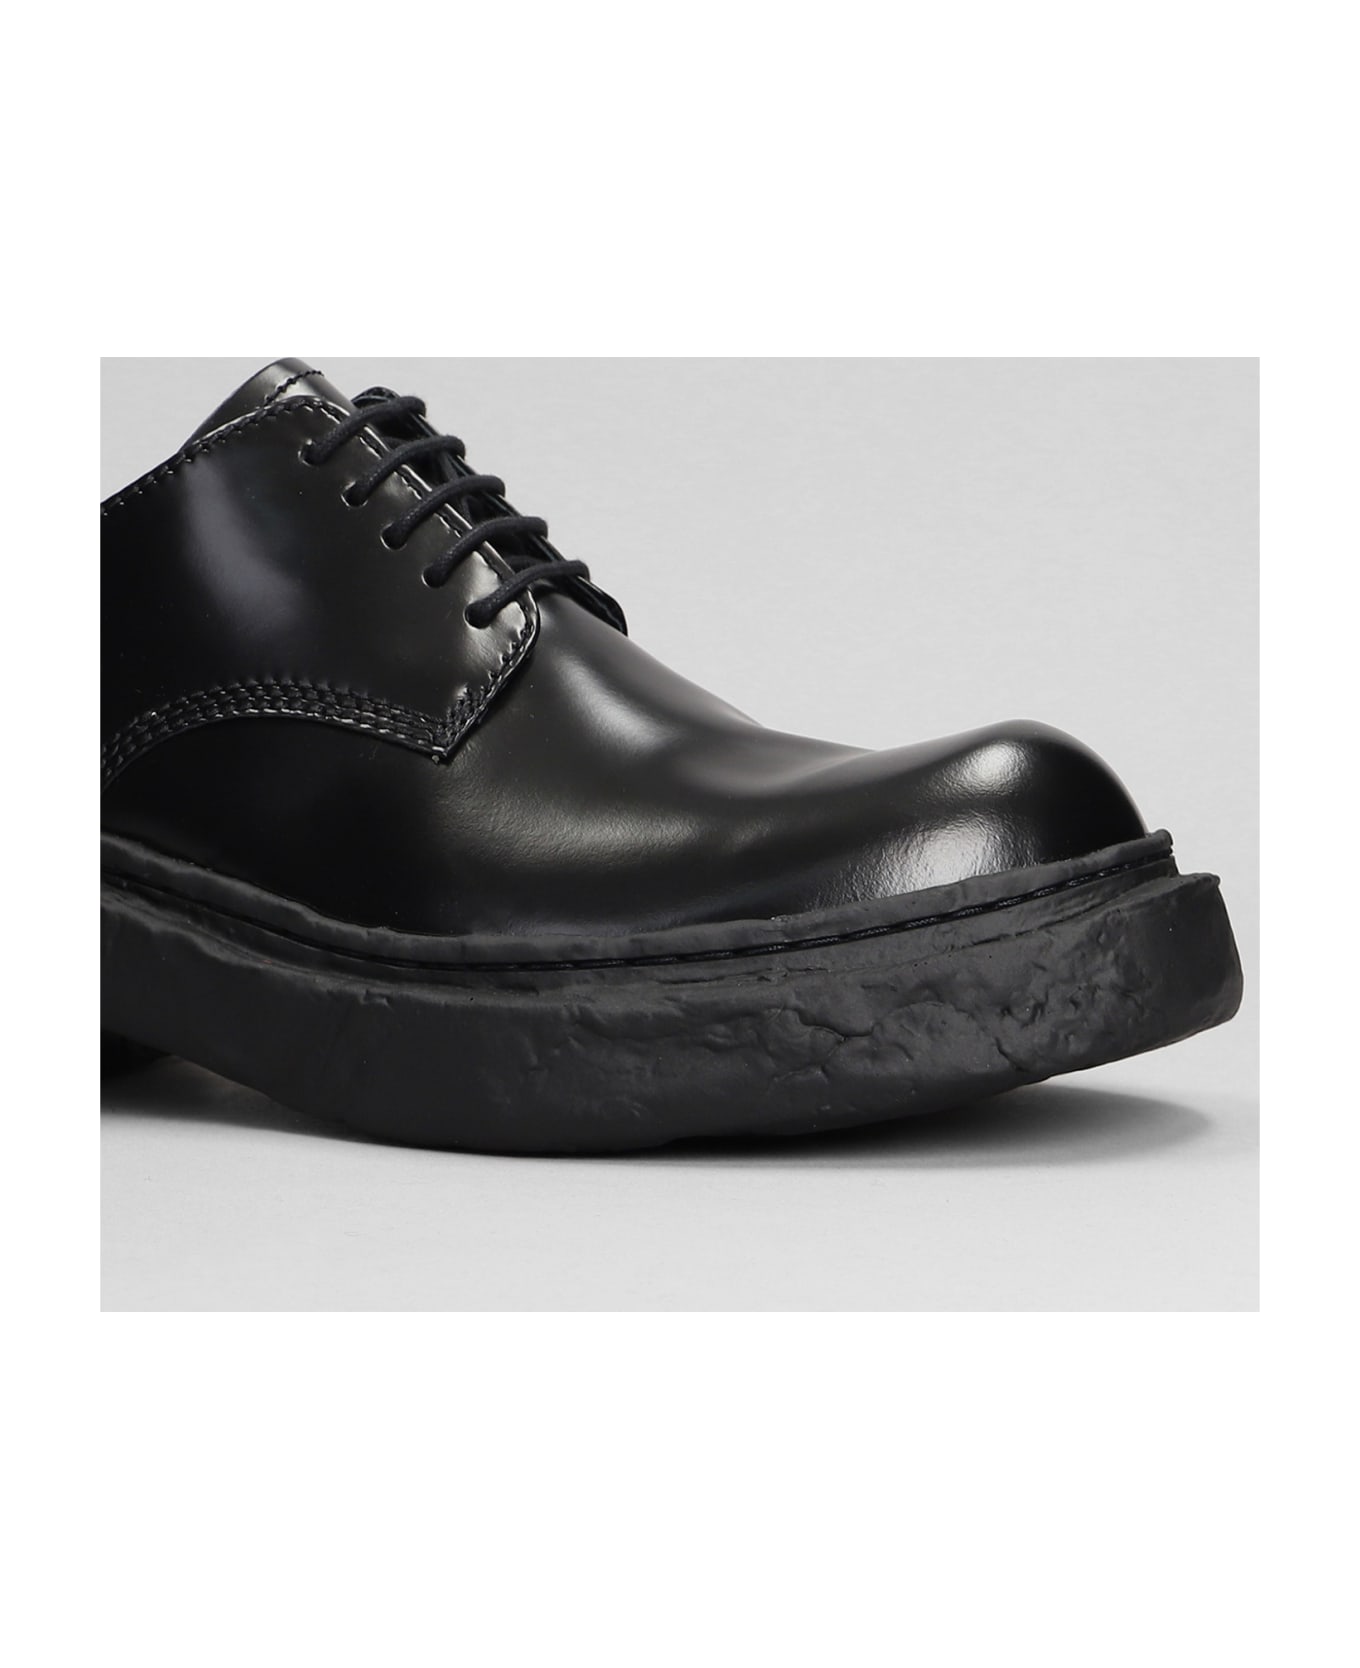 Camper Vamonos Lace Up Shoes In Black Leather - black レースアップシューズ